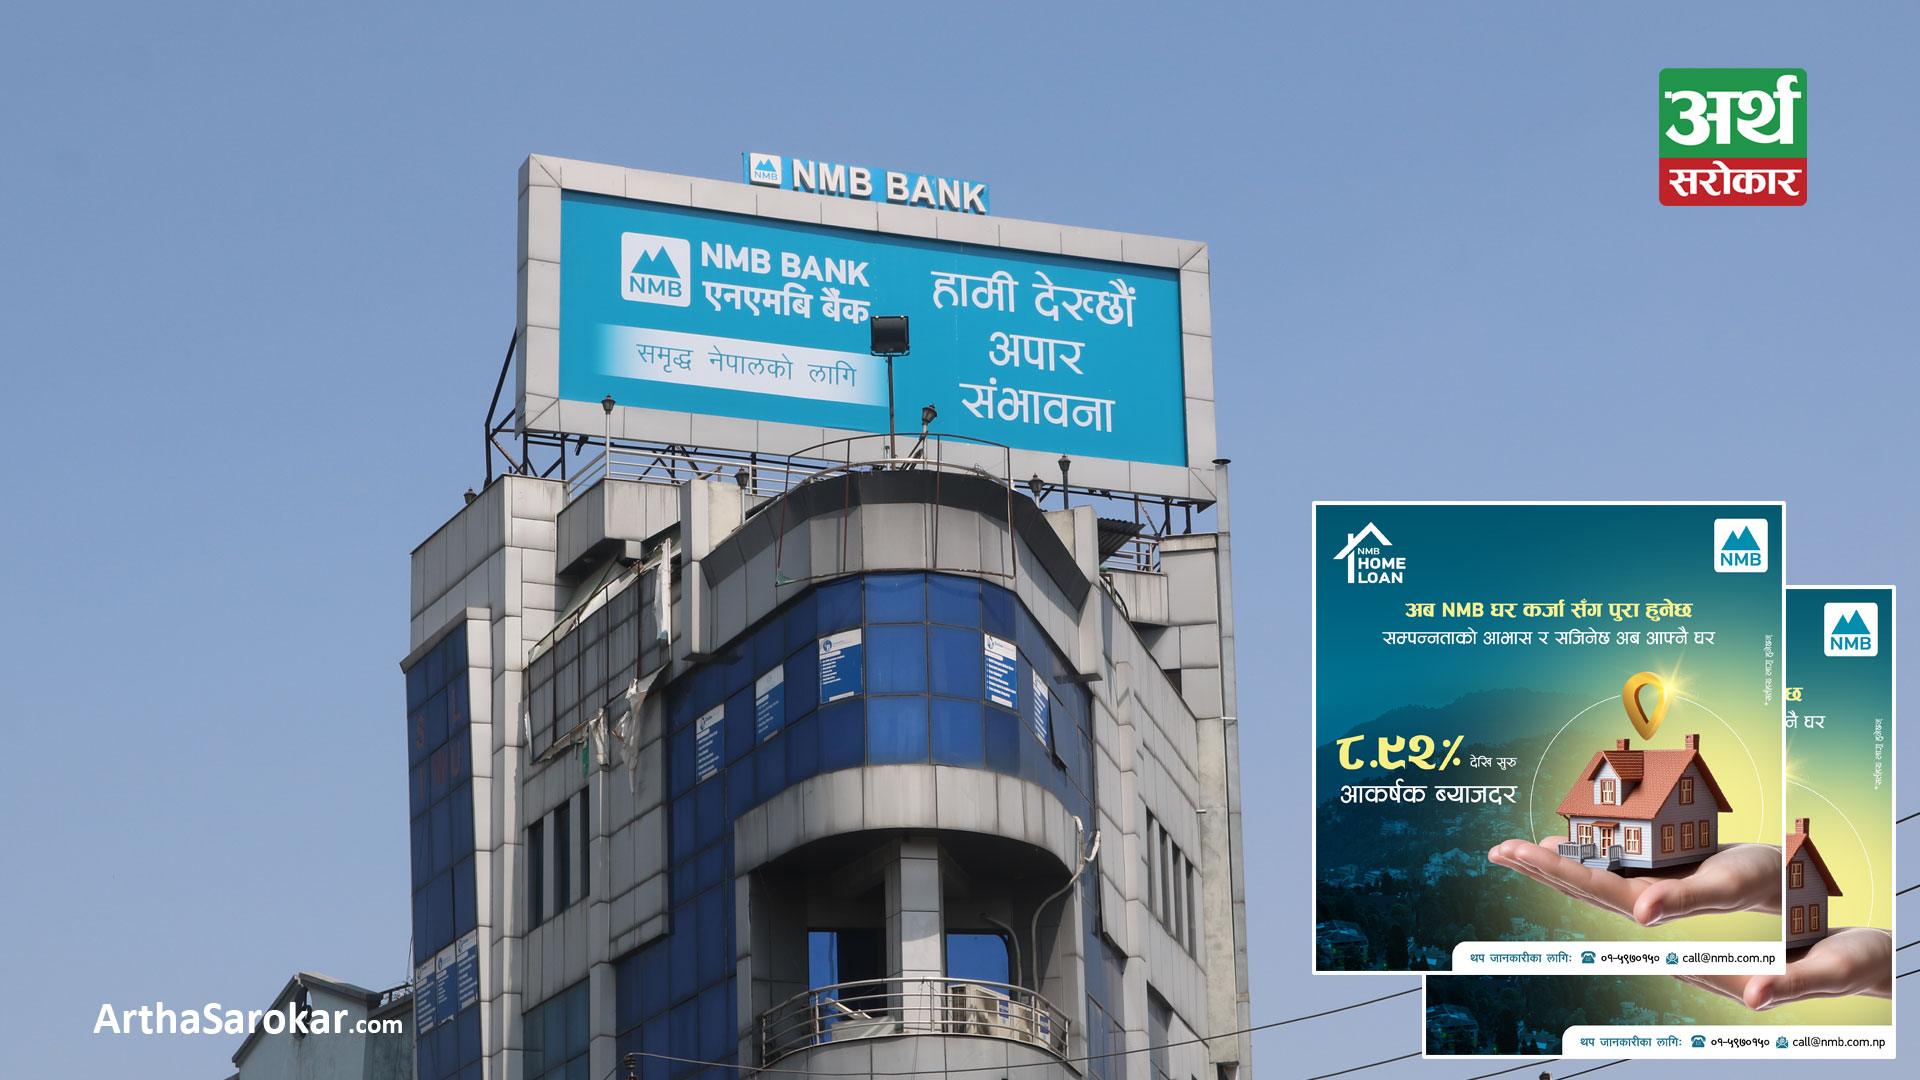 NMB Bank announces a competitive home loan rate starting at just 8.92%